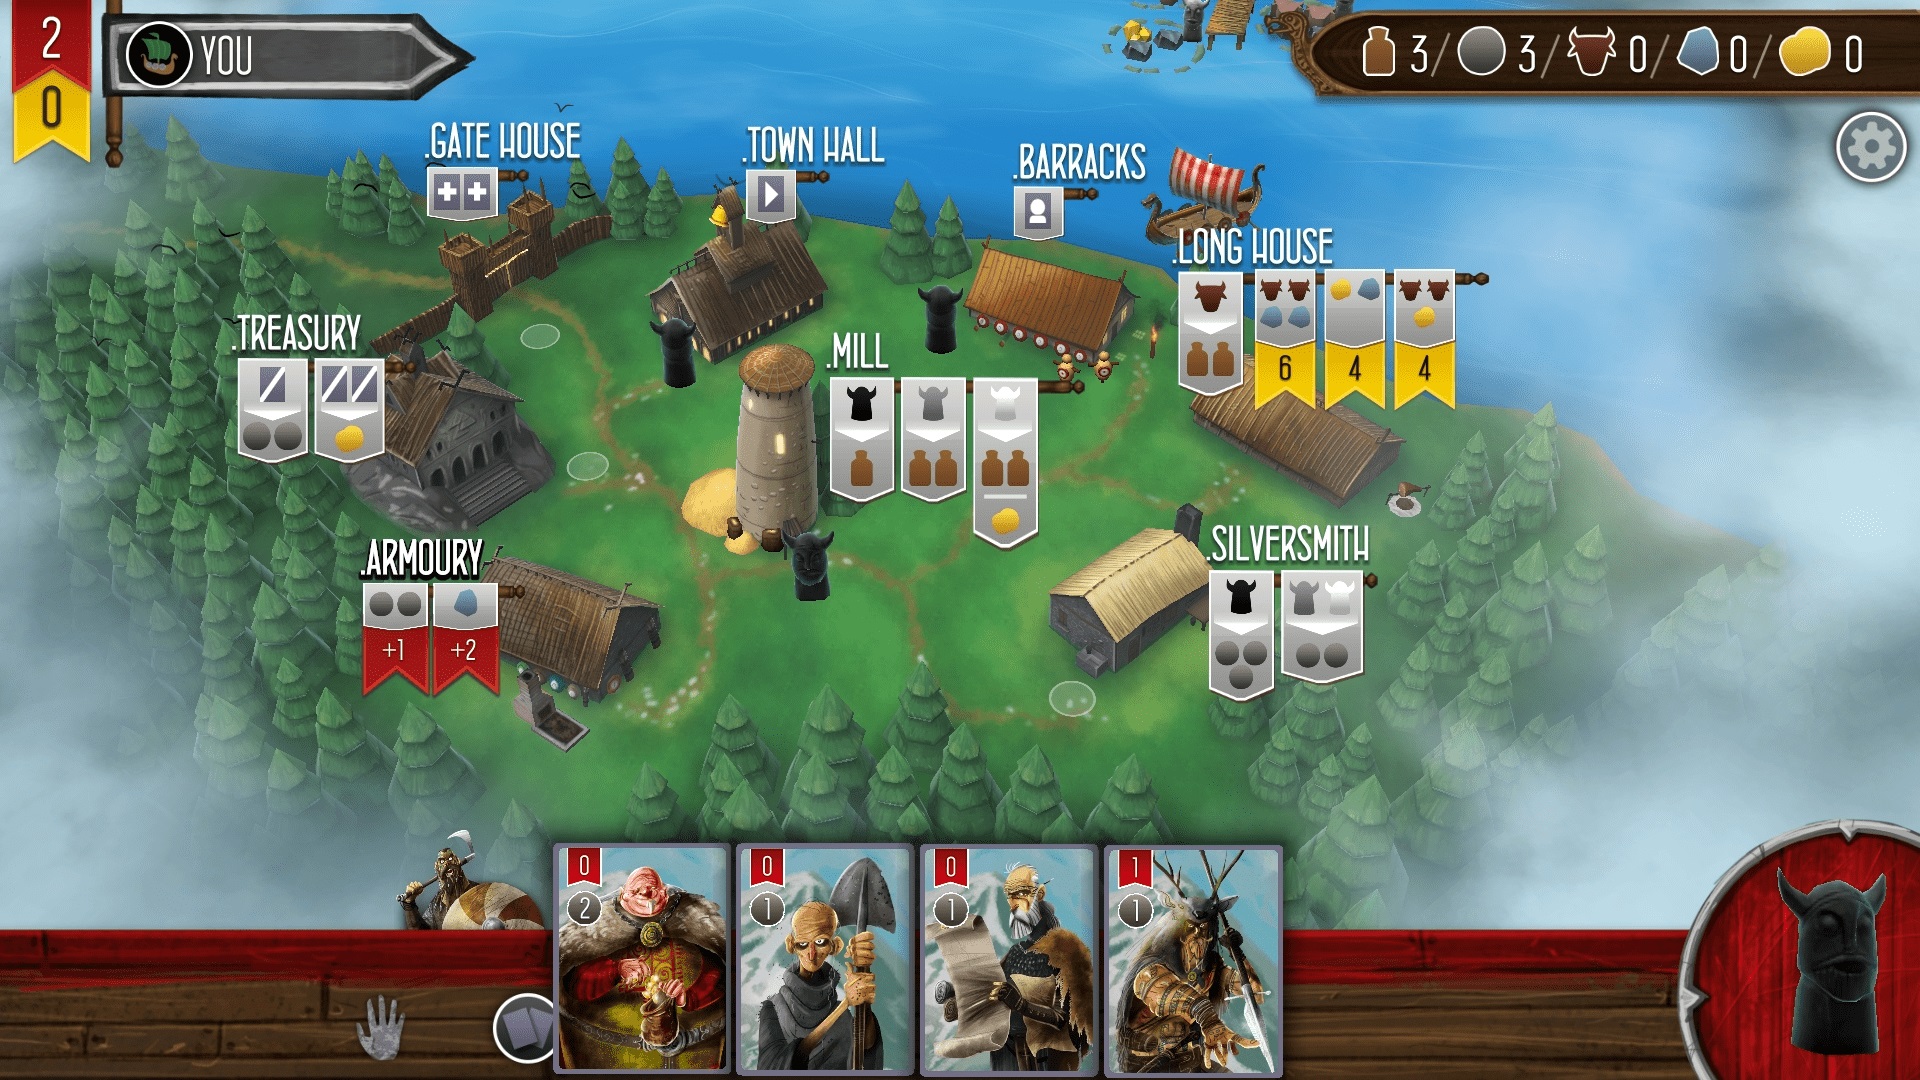 A New Challenger: Dire Wolf Digital is now making all of the (board) games